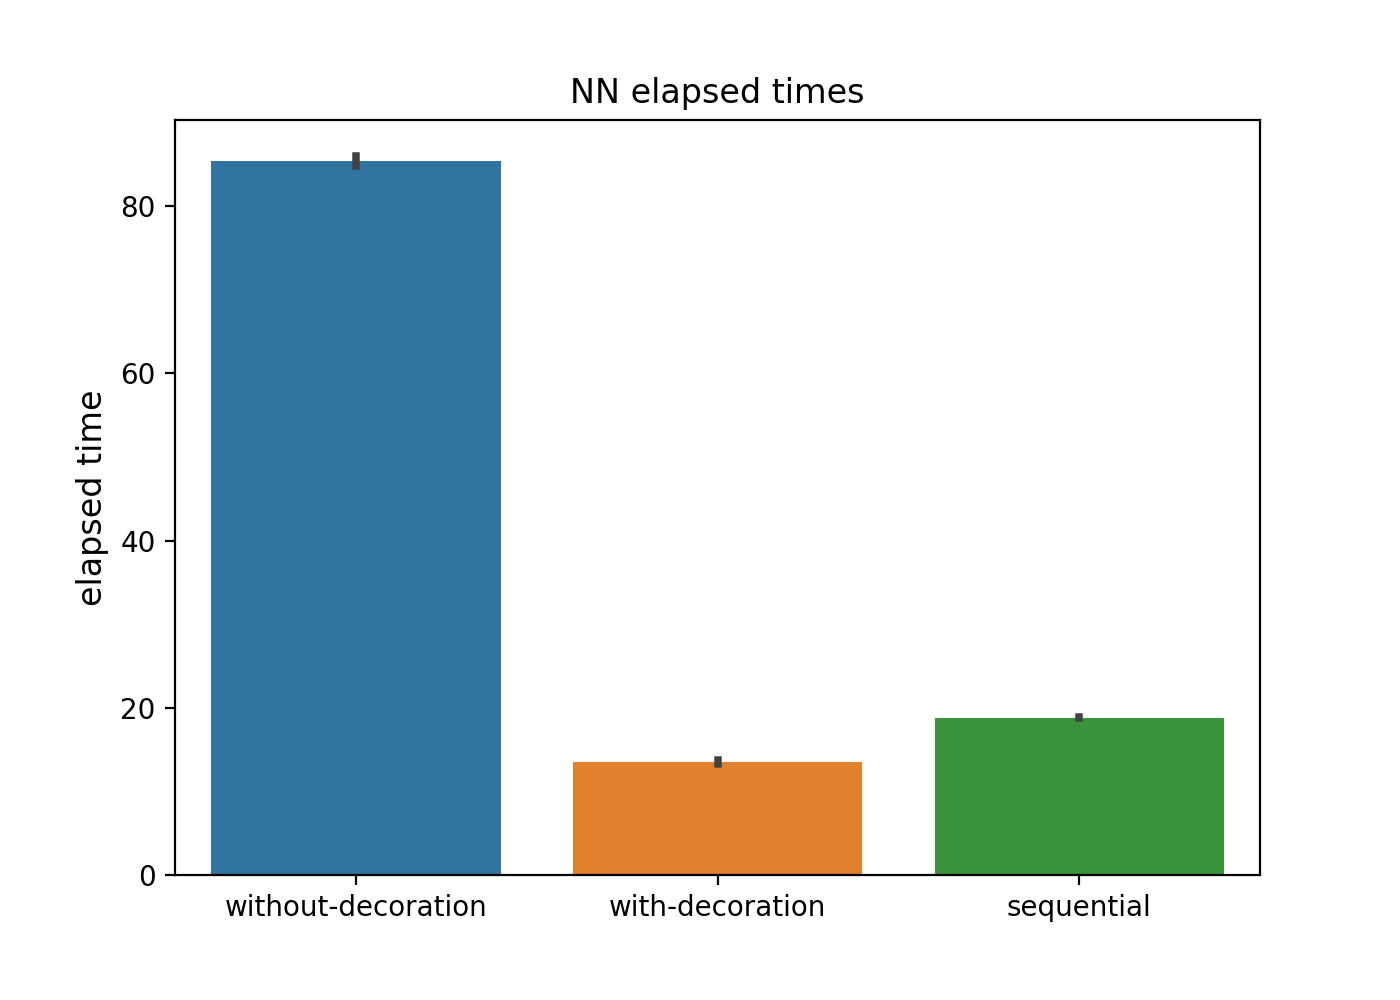 NN_elapsed_times_result.png